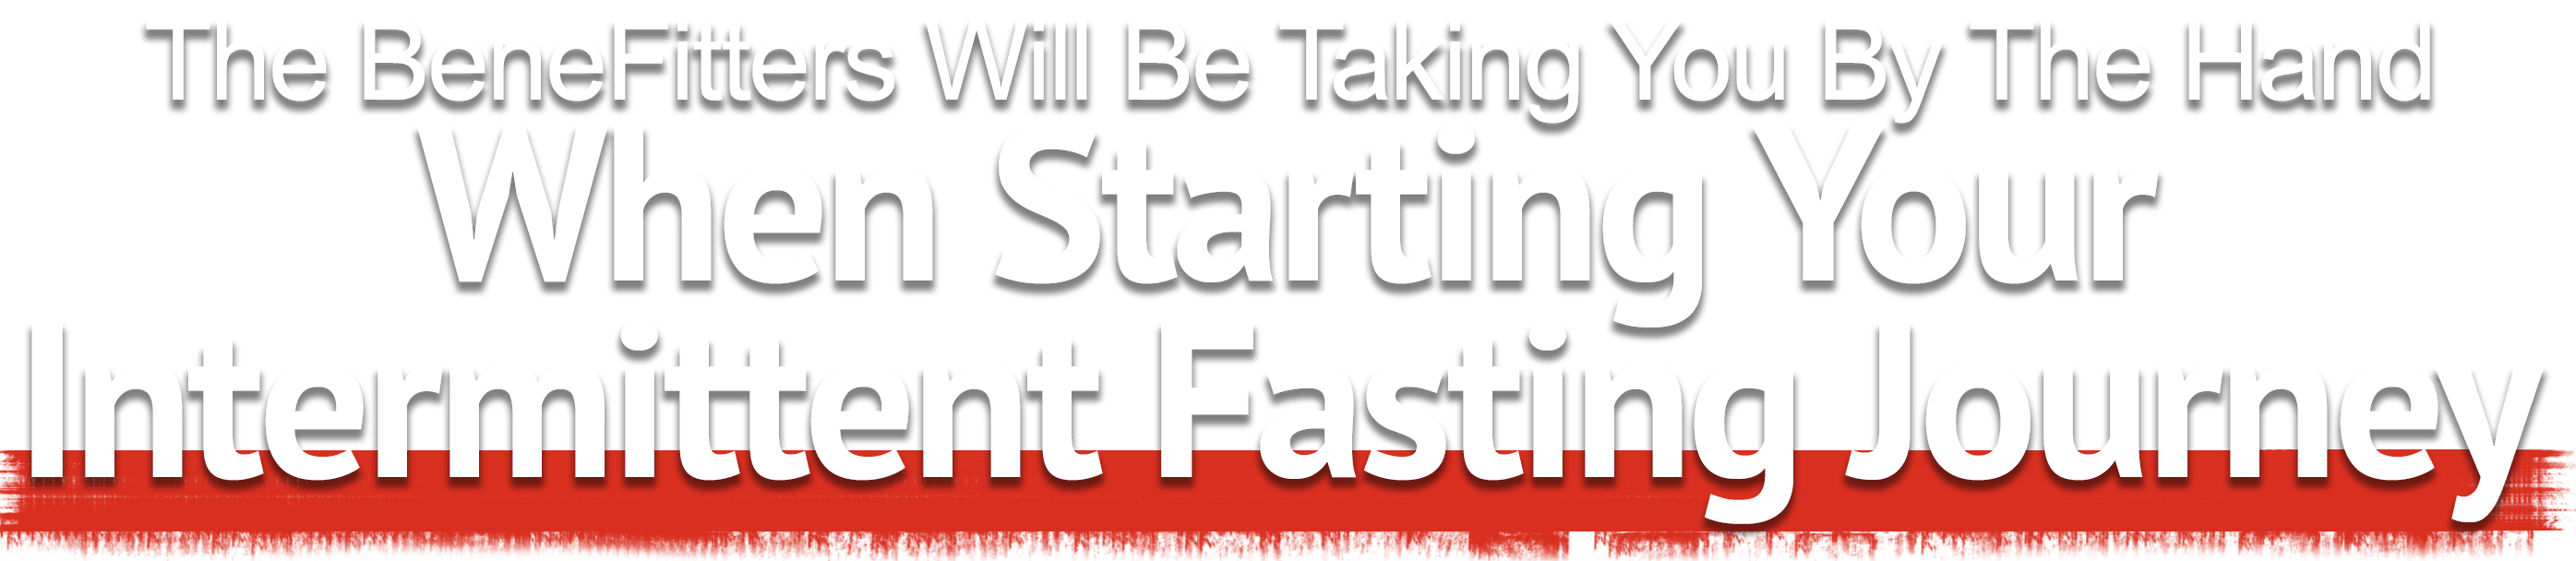 intermittent fasting guide, free intermittent fasting guide, intermittent fasting guide for beginners, beginners guide to intermittent fasting, how to start intermittent fasting